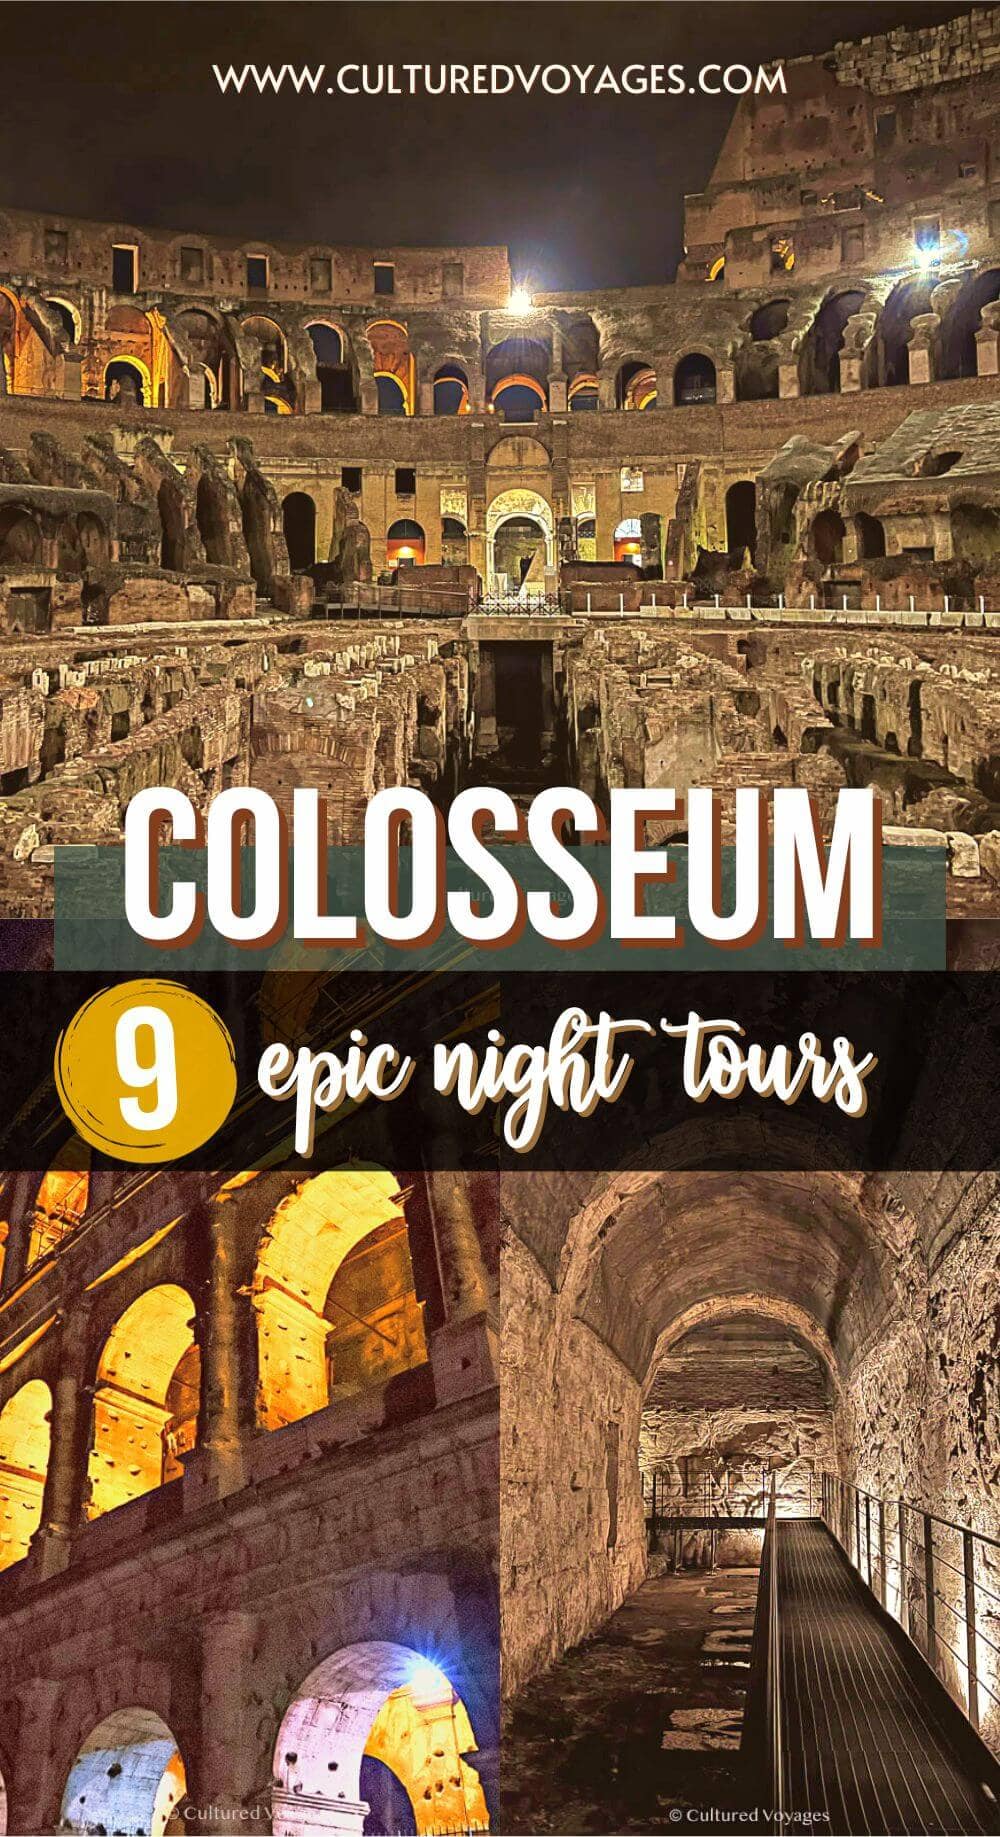 rome colosseum night tours Pinterest pin cover, arched wall openings of the Colosseum at night lighted inside, view inside the Colosseum at night featuring the upper seats, a center hall, and a ground with ruins of halls and entryways lighted by lamps, and tunnel with a lifted walkway